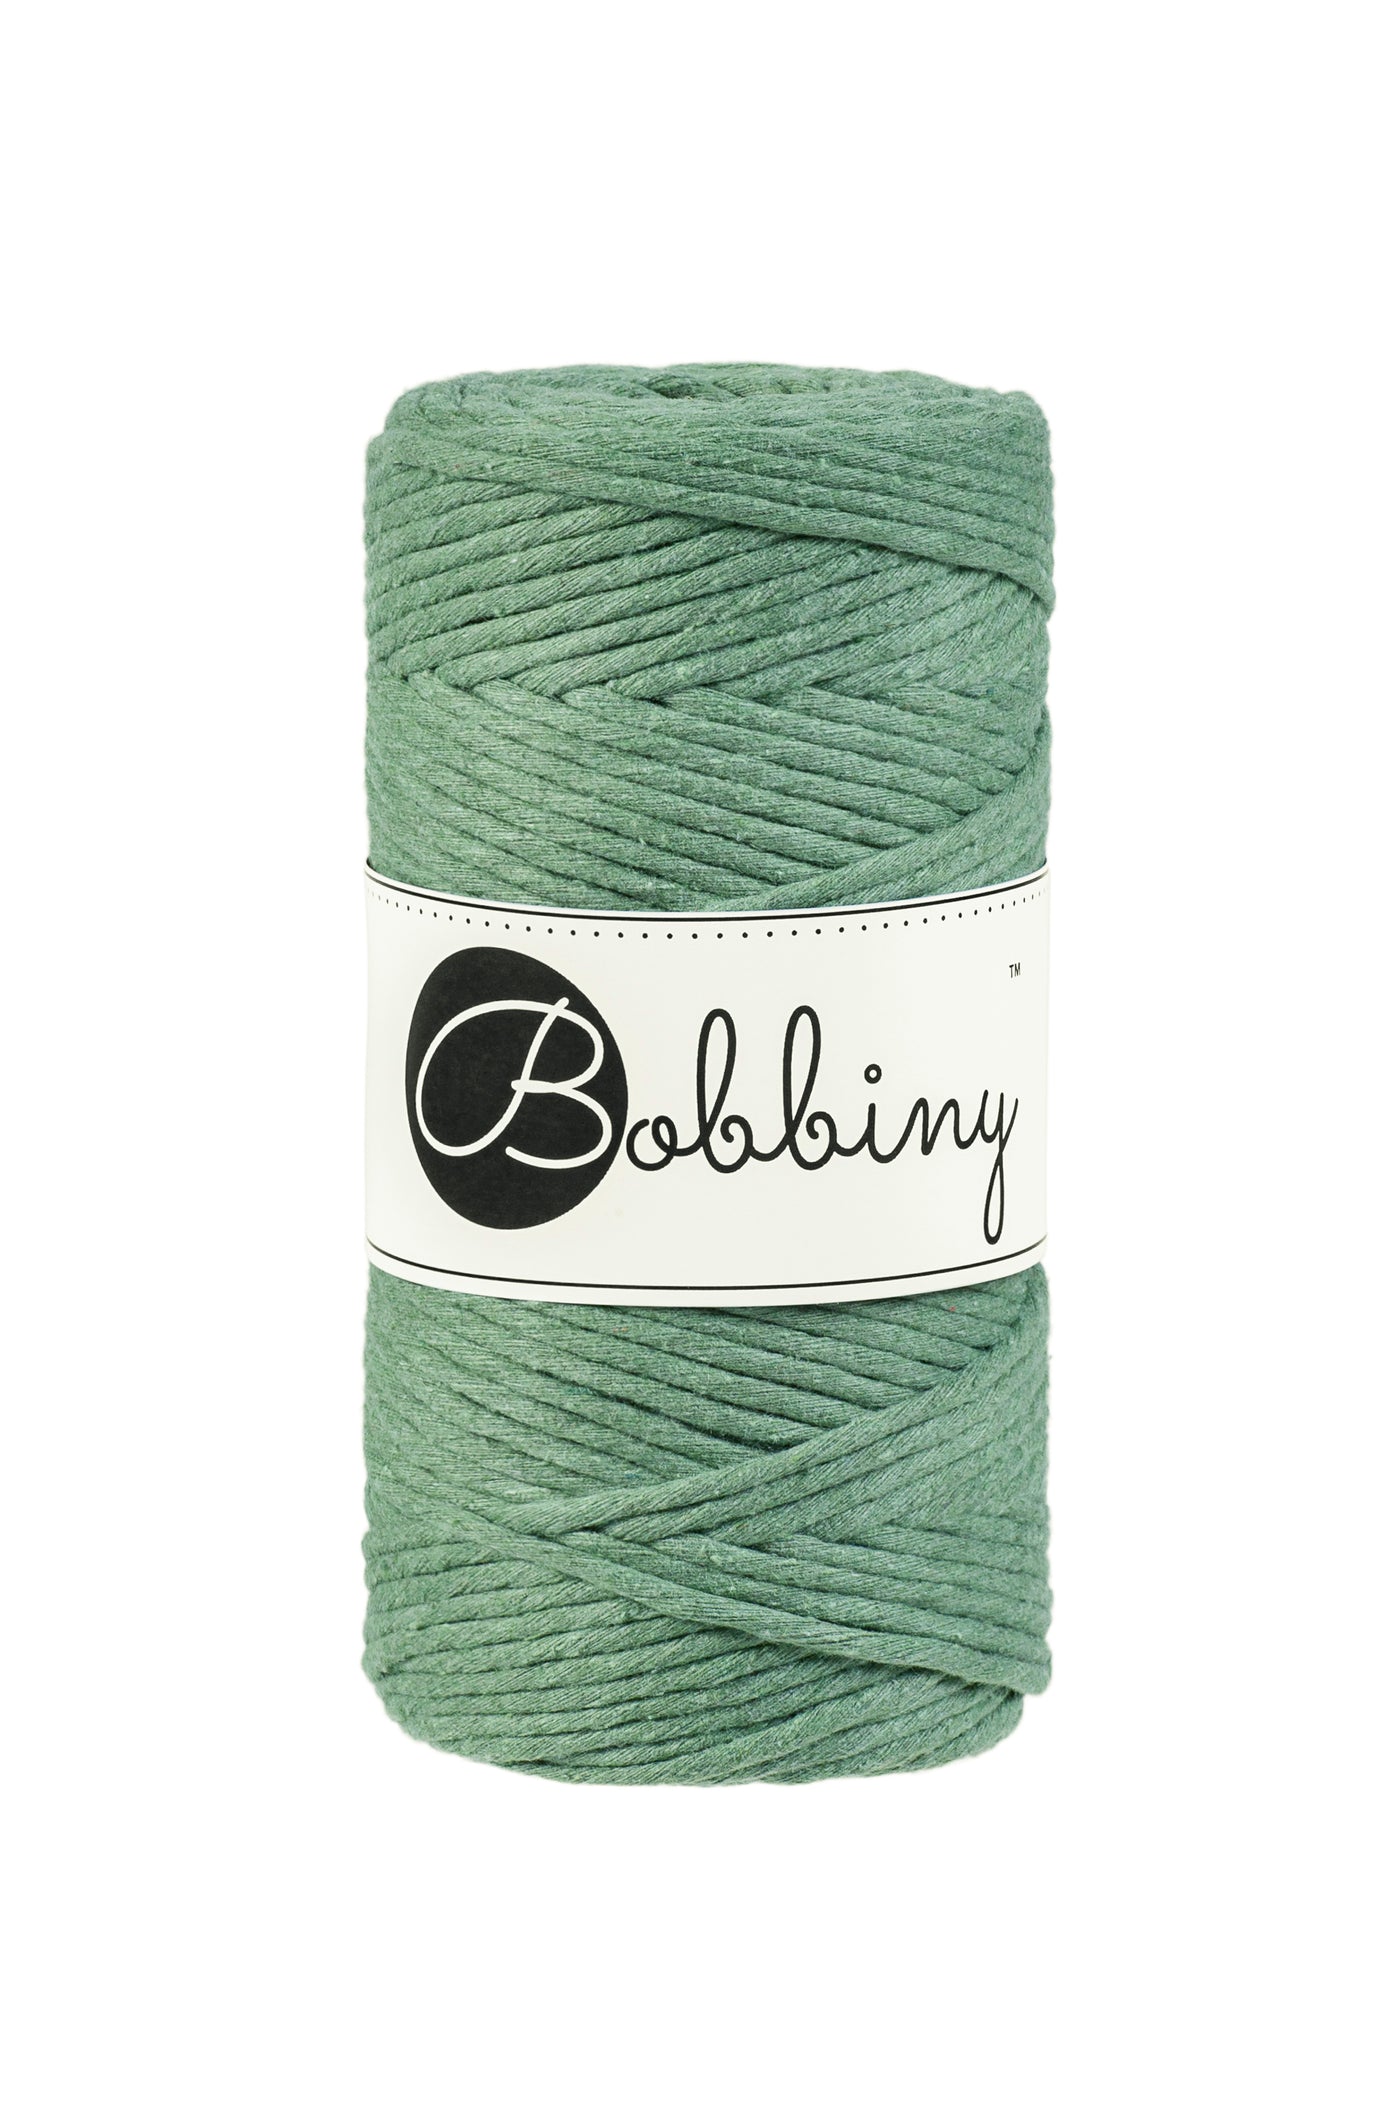 This super soft cord is perfect for Macrame or any other fibre art, and makes the most spectacular fringes and tassels.  It is made from 100% recycled cotton, is single twist and contains 56 individual fibres.  It contains no harmful substances and is approved to Oeko-Tex standards.  The inner spool is made from recycled paper and is biodegradable.  Length 100m (108 yards)  Weight 330 gms